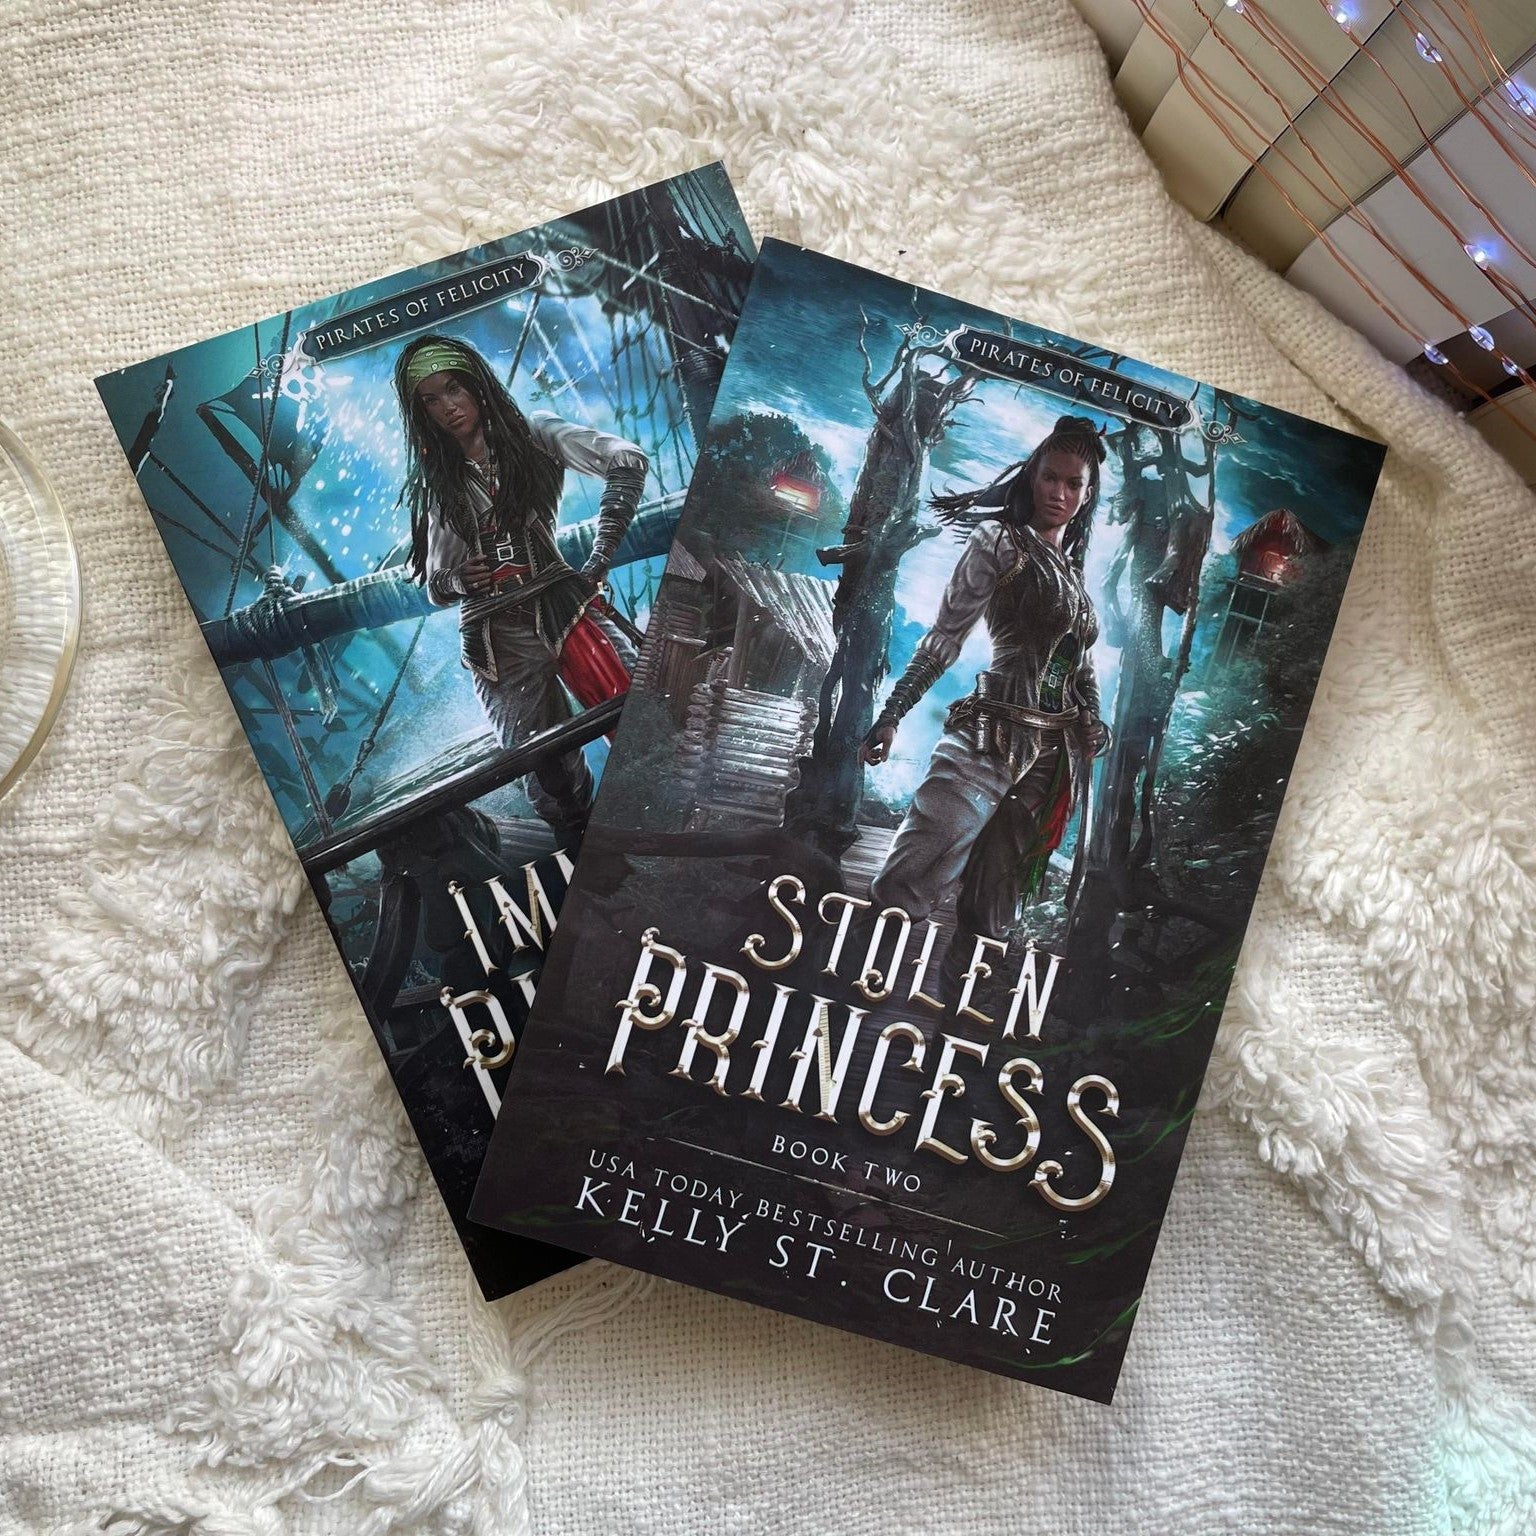 Pirates of Felicity by Kelly St Clare